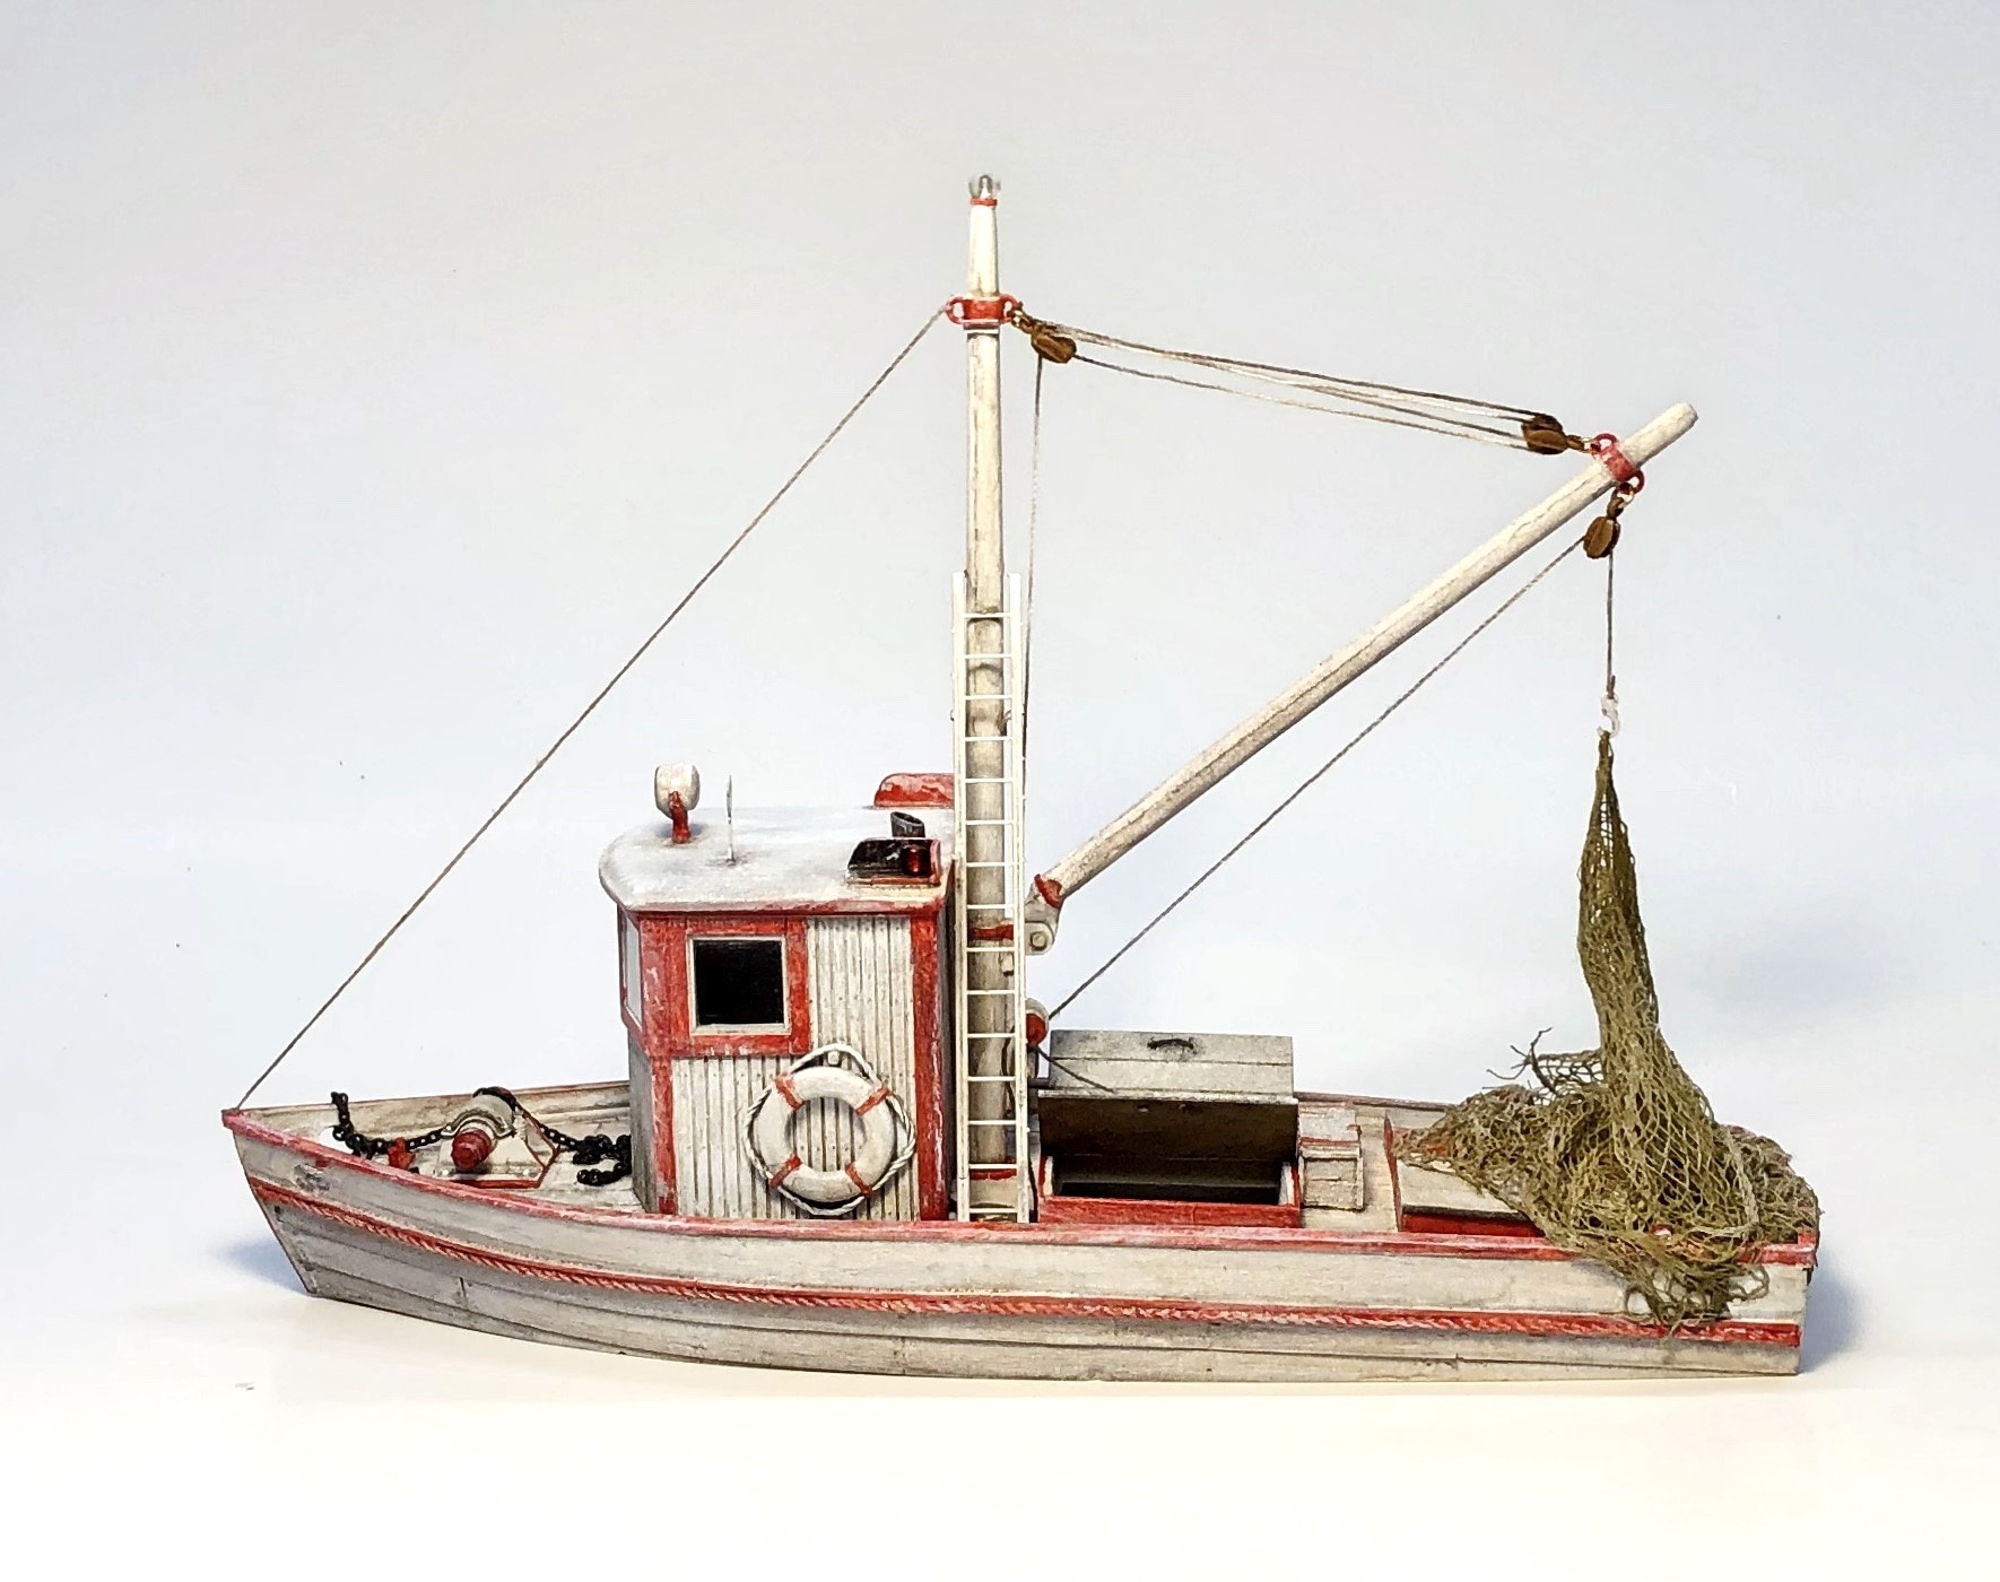 O 1:48 Scale Wooden Fishing Boat Kit for Diorama, Model